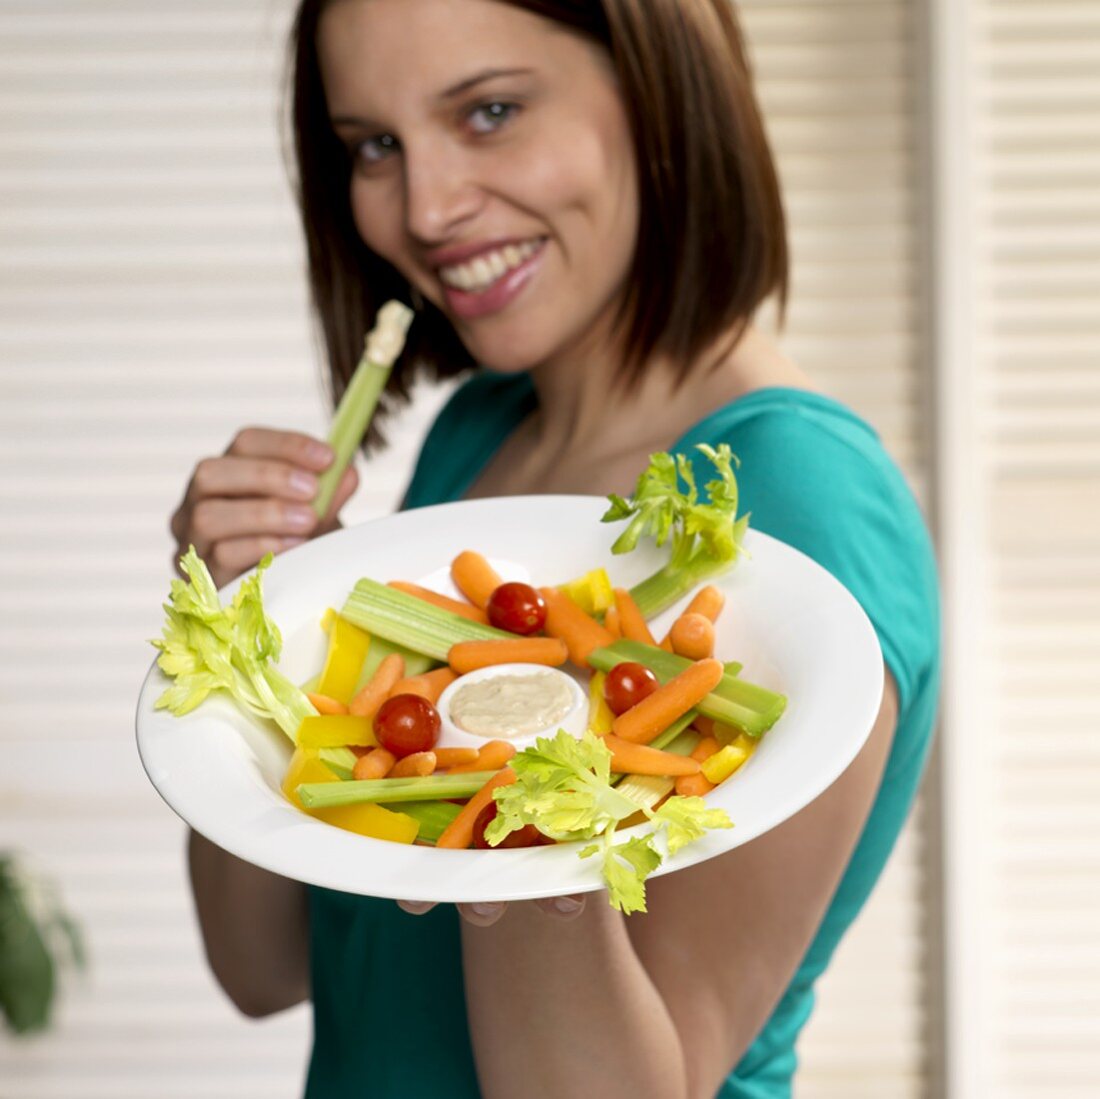 Woman Holding Vegetable Platter in One Hand and Celery in the Other